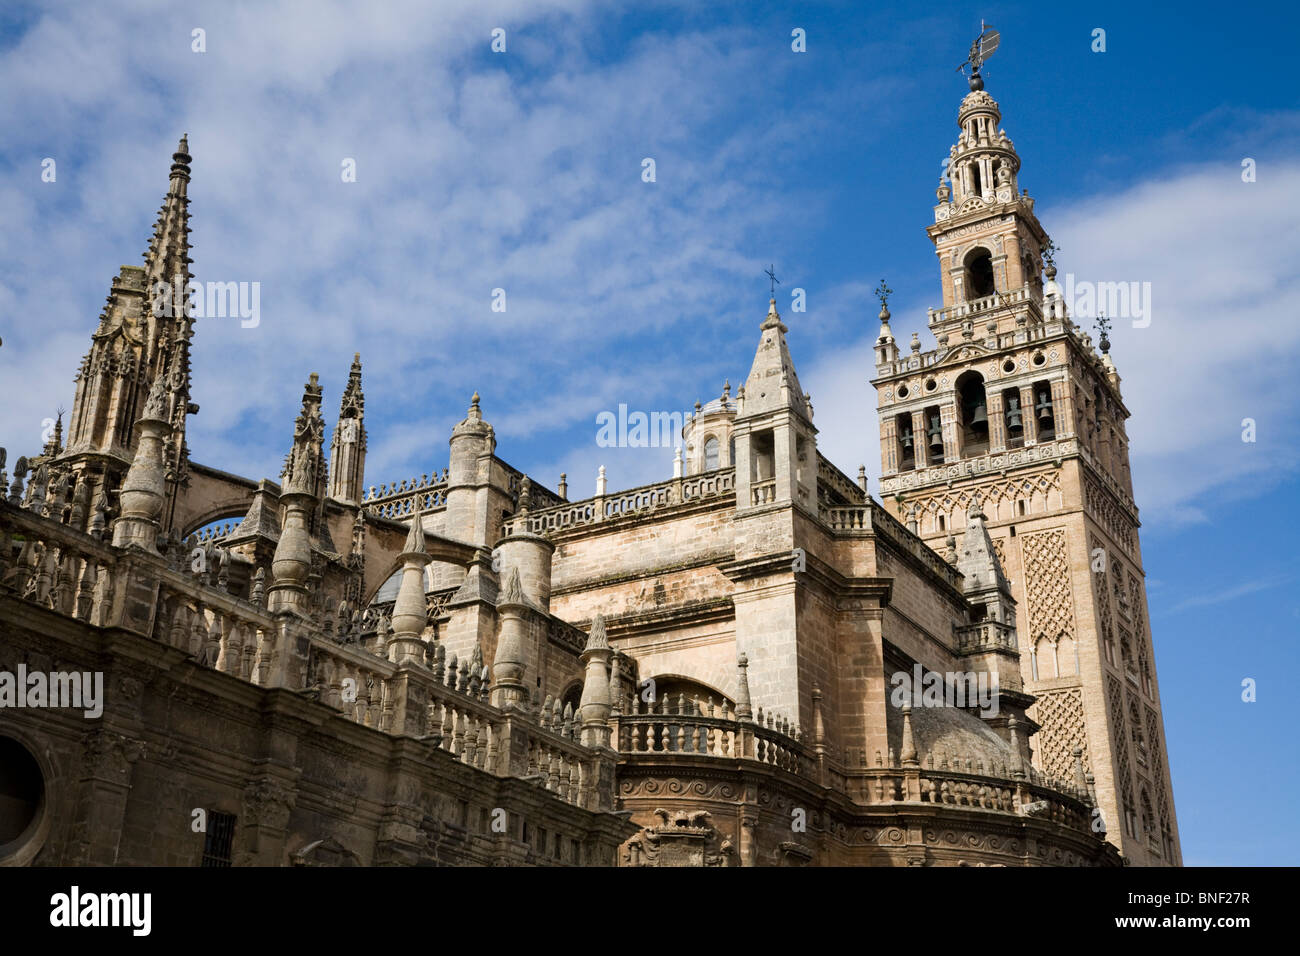 The Giralda tower (former mosque minaret converted into Cathedral bell tower) in Seville / Sevilla, & side of Seville Cathedral. Stock Photo